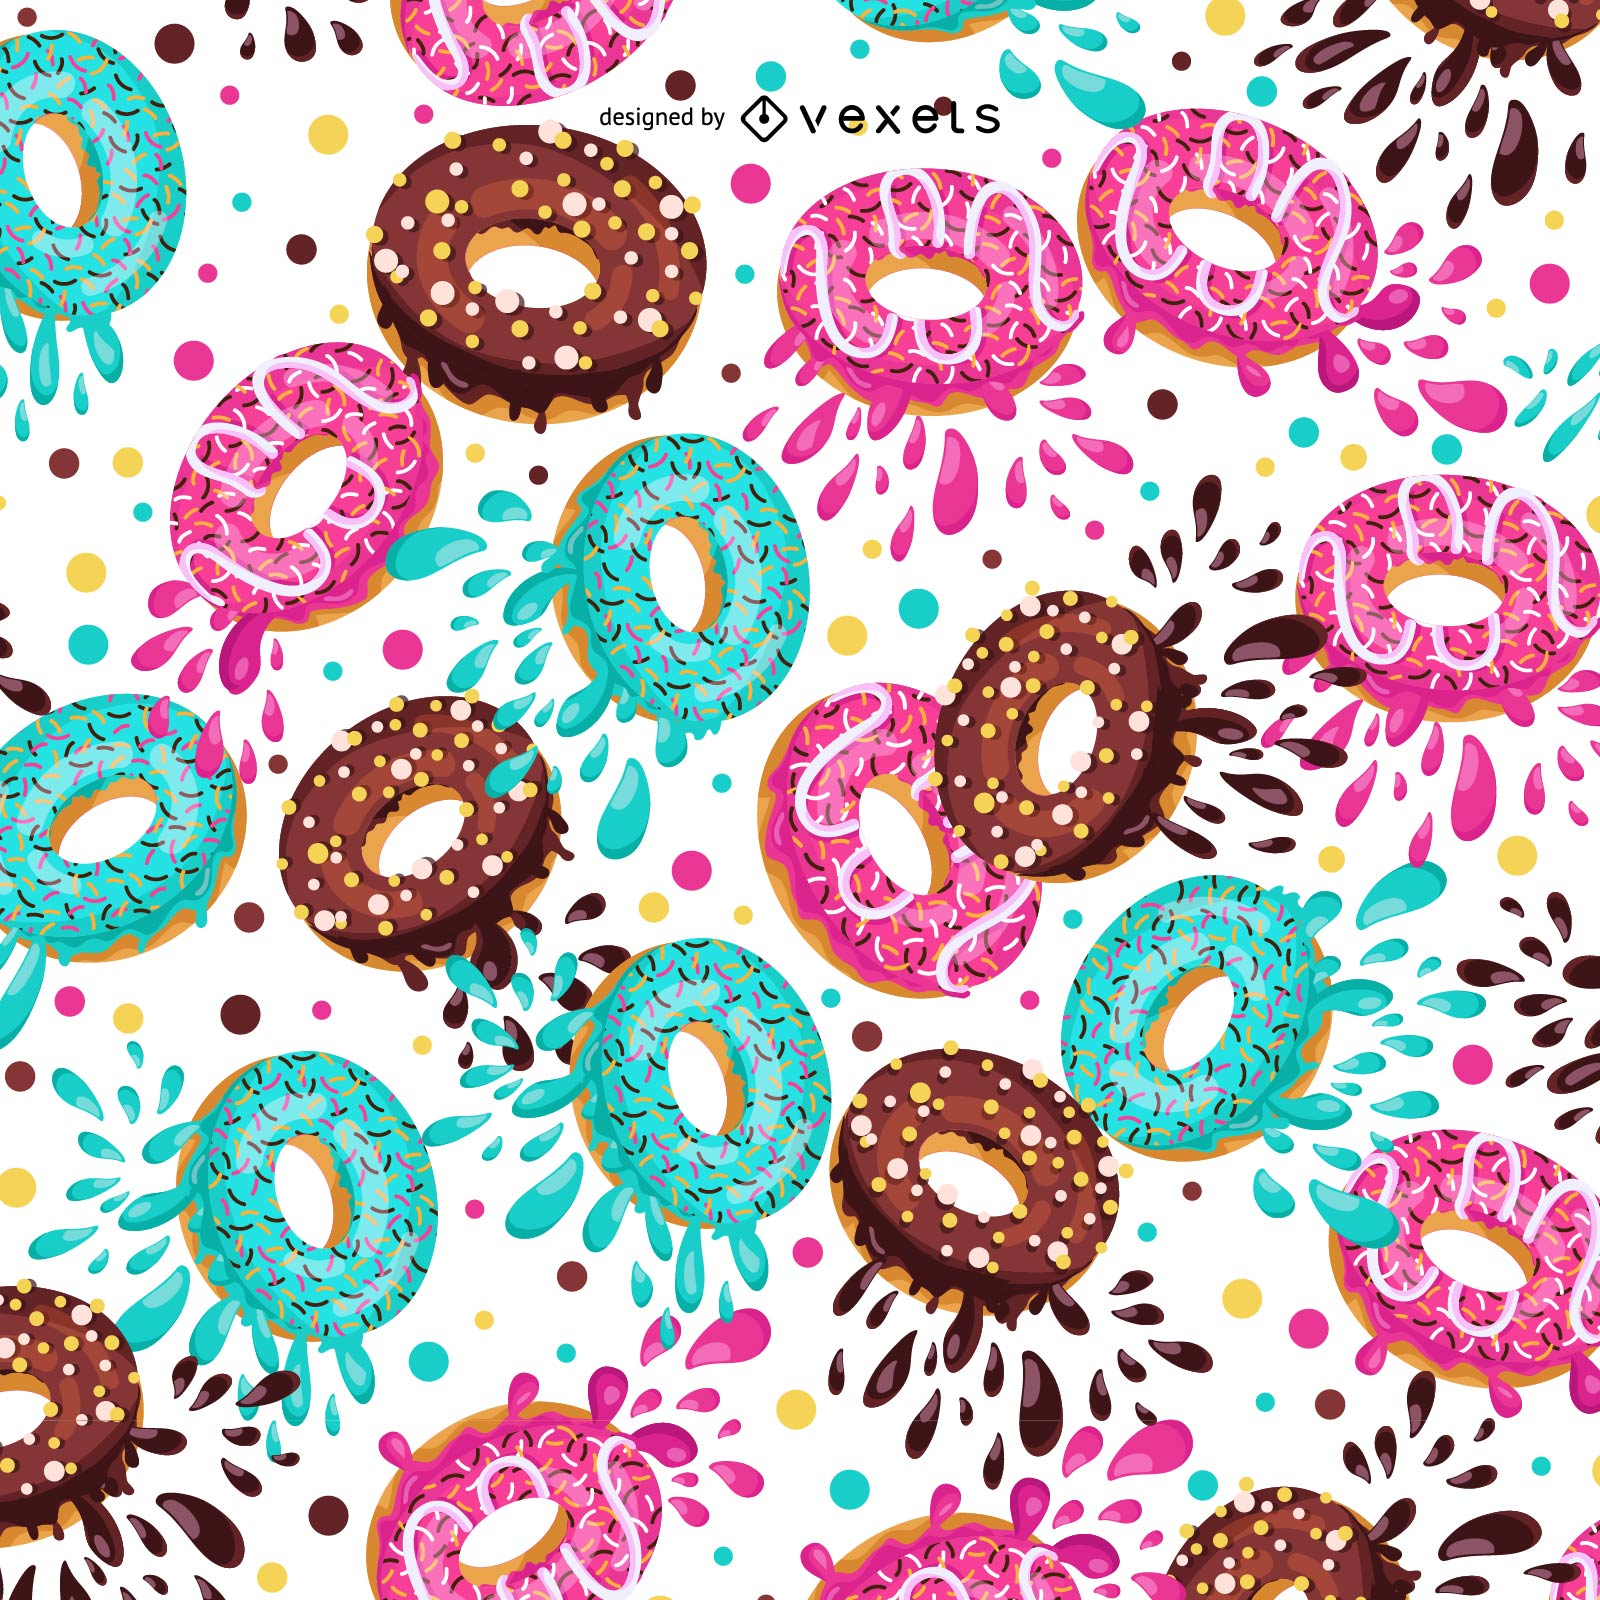 Illustrated donuts pattern design